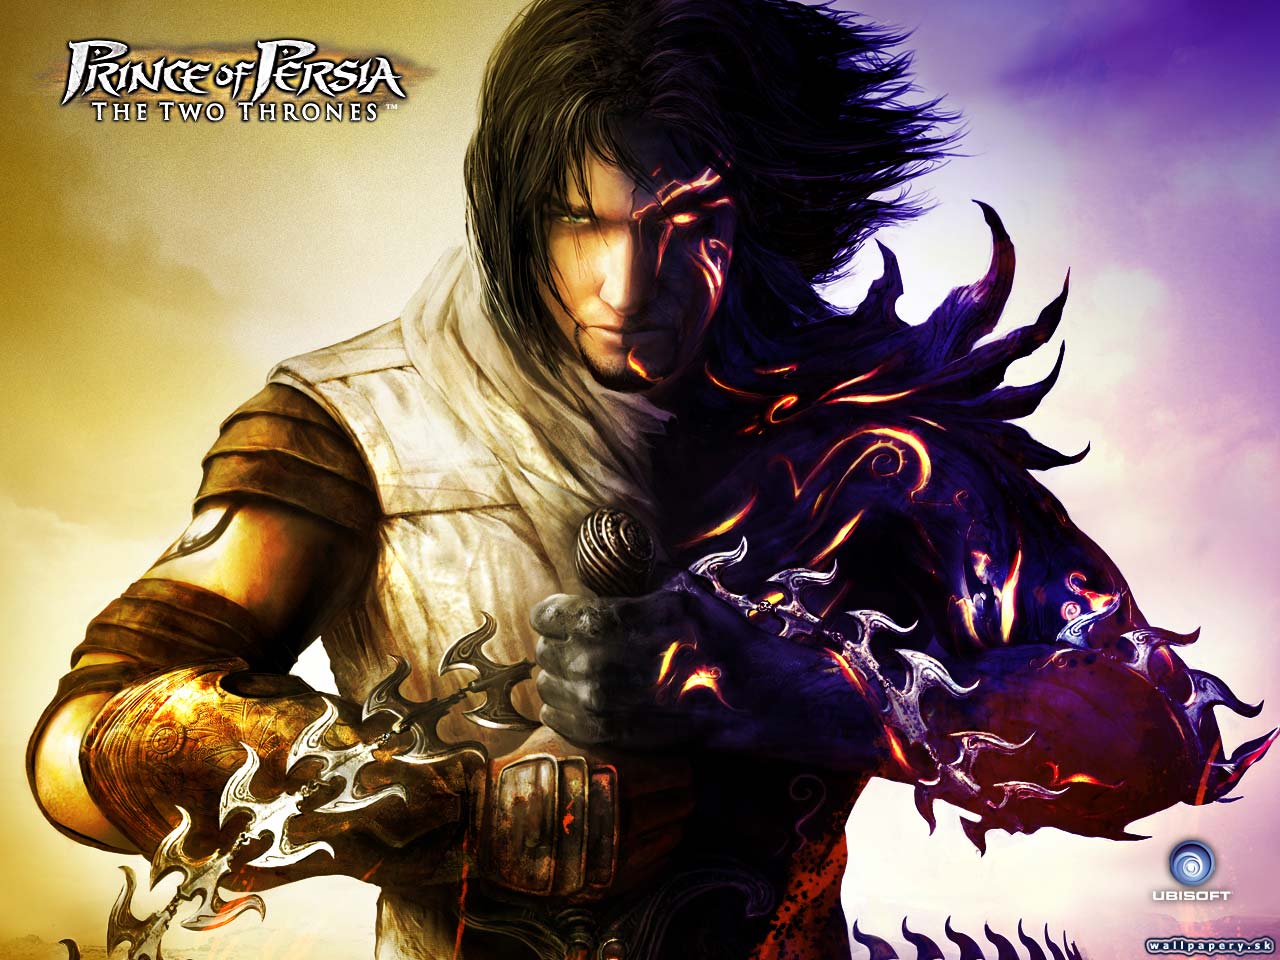 Prince of Persia: The Two Thrones - wallpaper 1